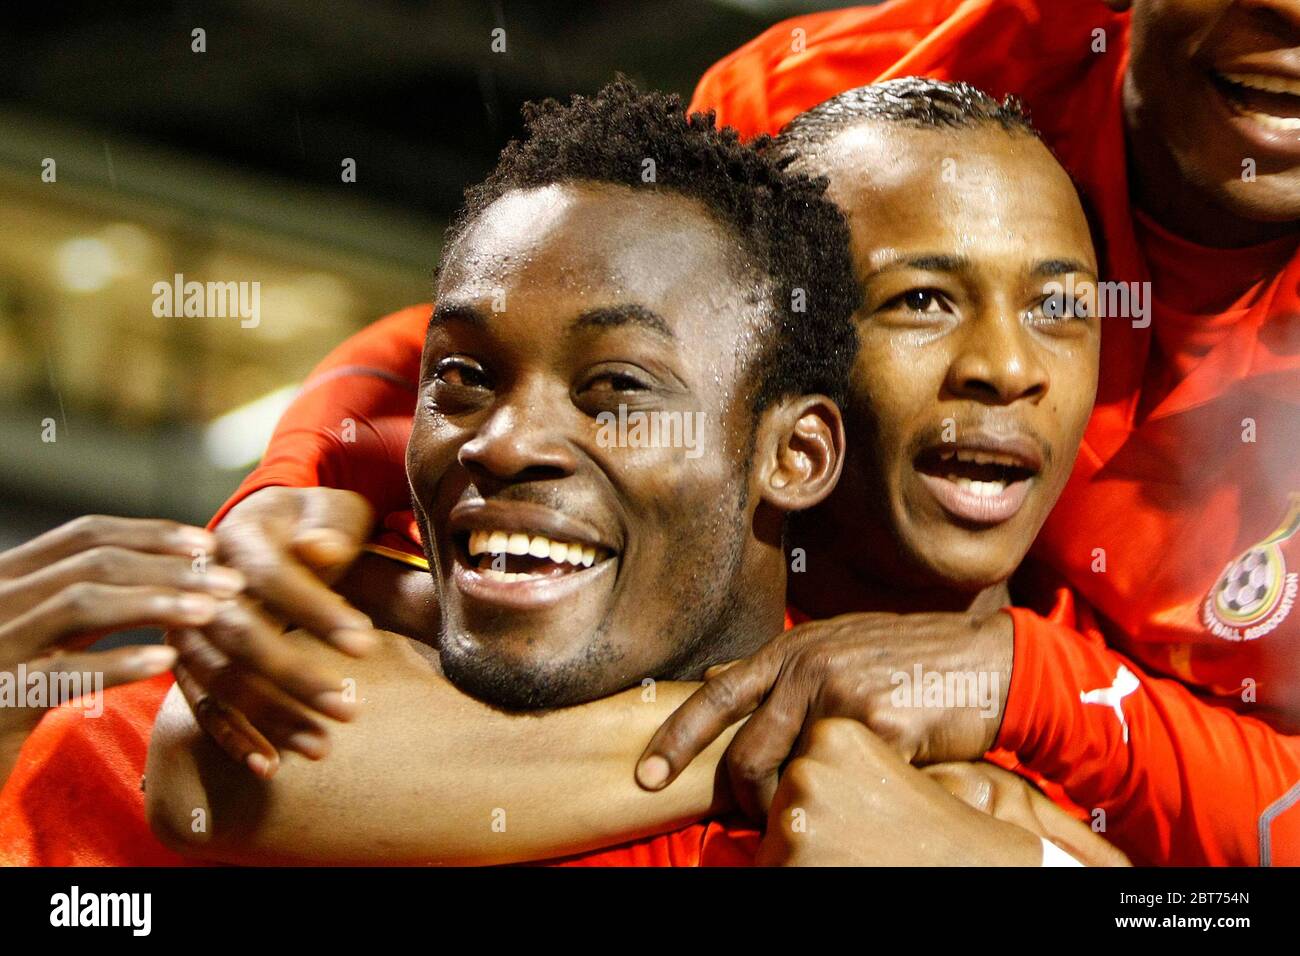 LONDON, UK. MARCH 26: Michael Essien celebrates scoring Ghana's goal against Mexico  during International Friendly between Mexico City and Ghana at Cr Stock Photo